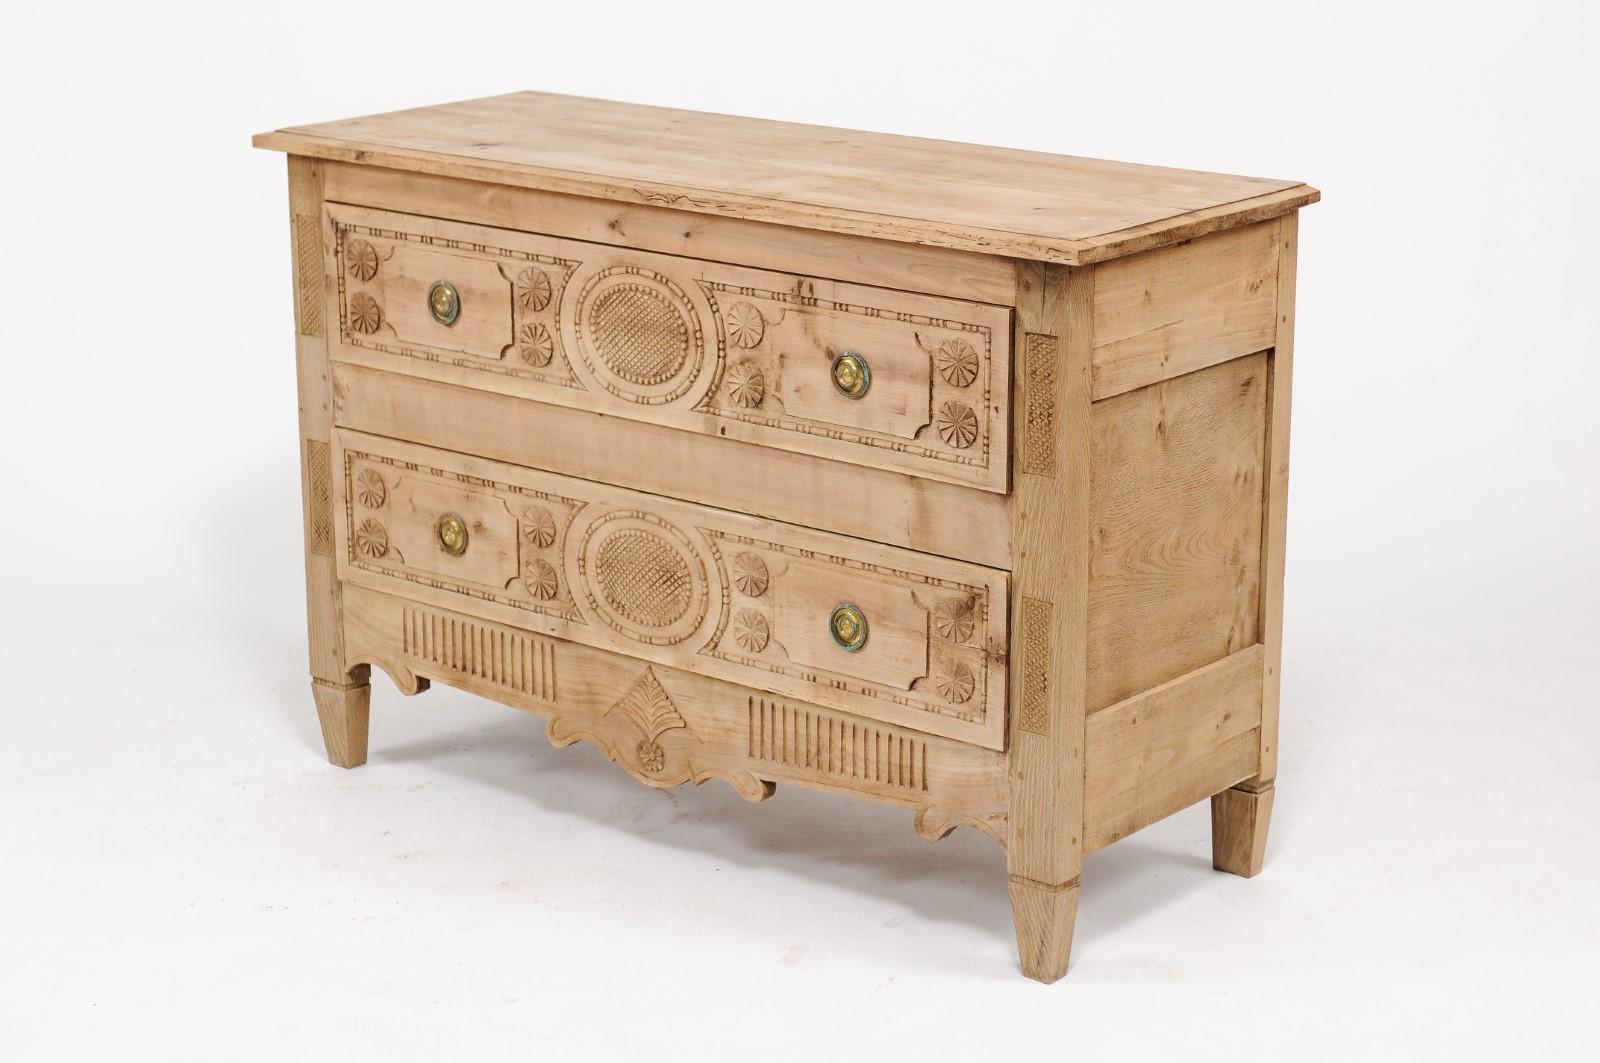 A northern French Louis XVI style stripped oak commode from the early 20th century, with two drawers, beaded motifs and carved medallions. We love the Louis XVI classical lines, the decorative flourishes and the contrast with the rustic nature and